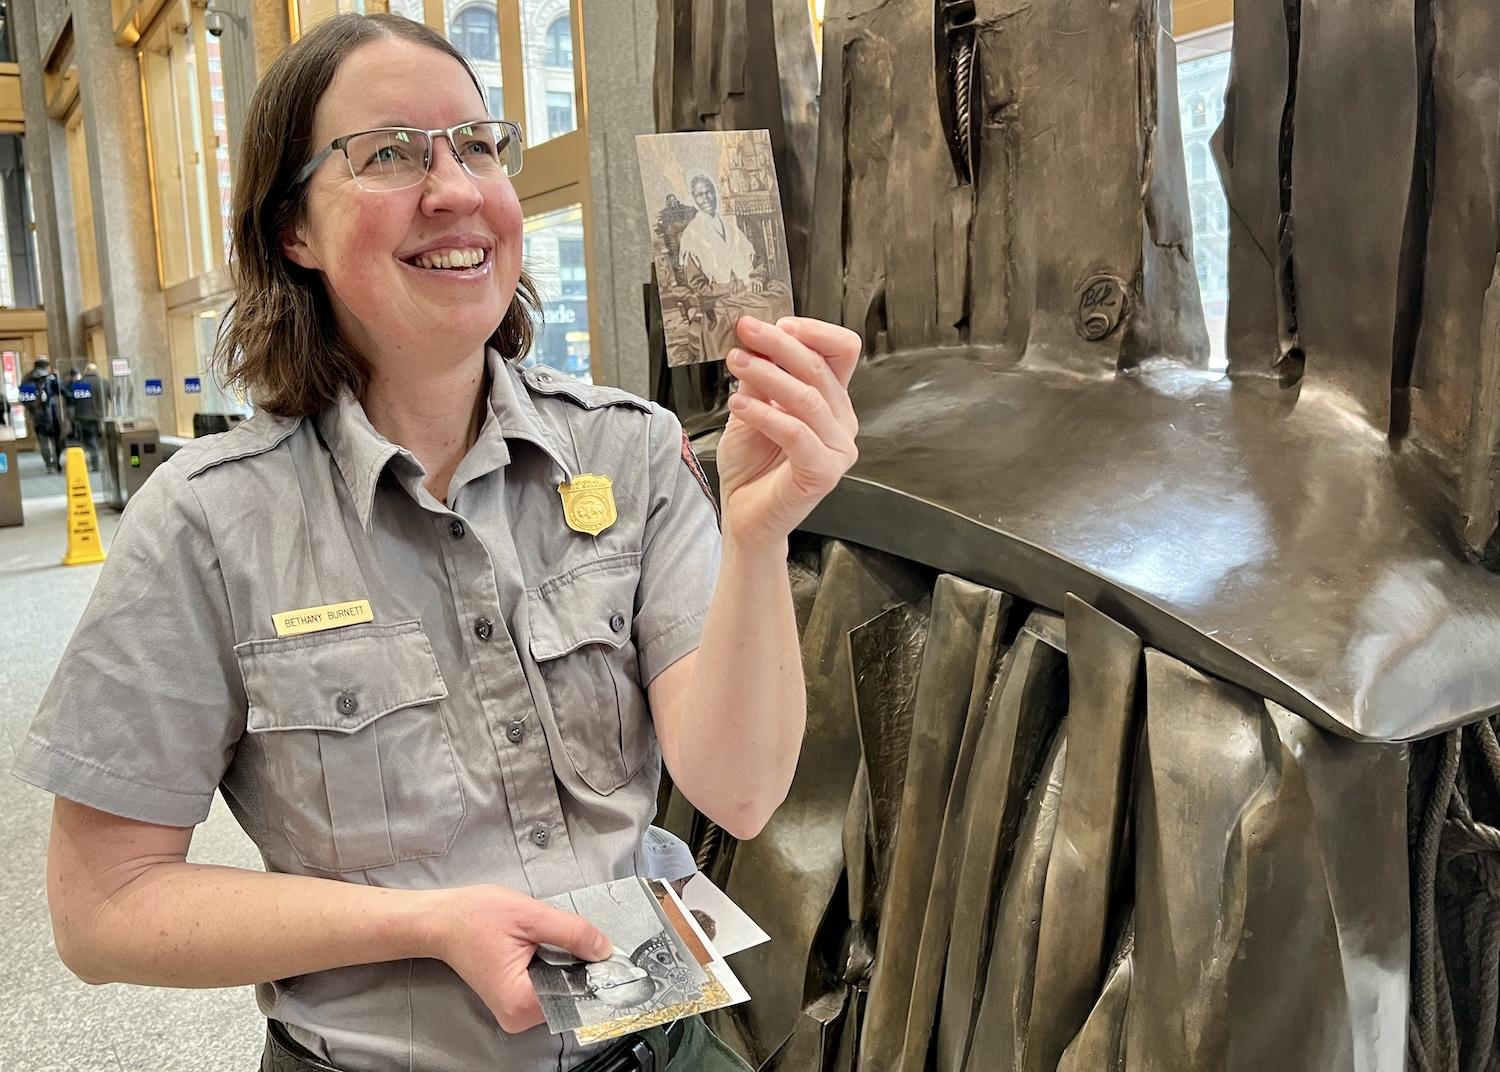 Ranger Bethany Burnett stands by a sculpture called Africa Rising in the Ted Weiss Federal Building lobby.